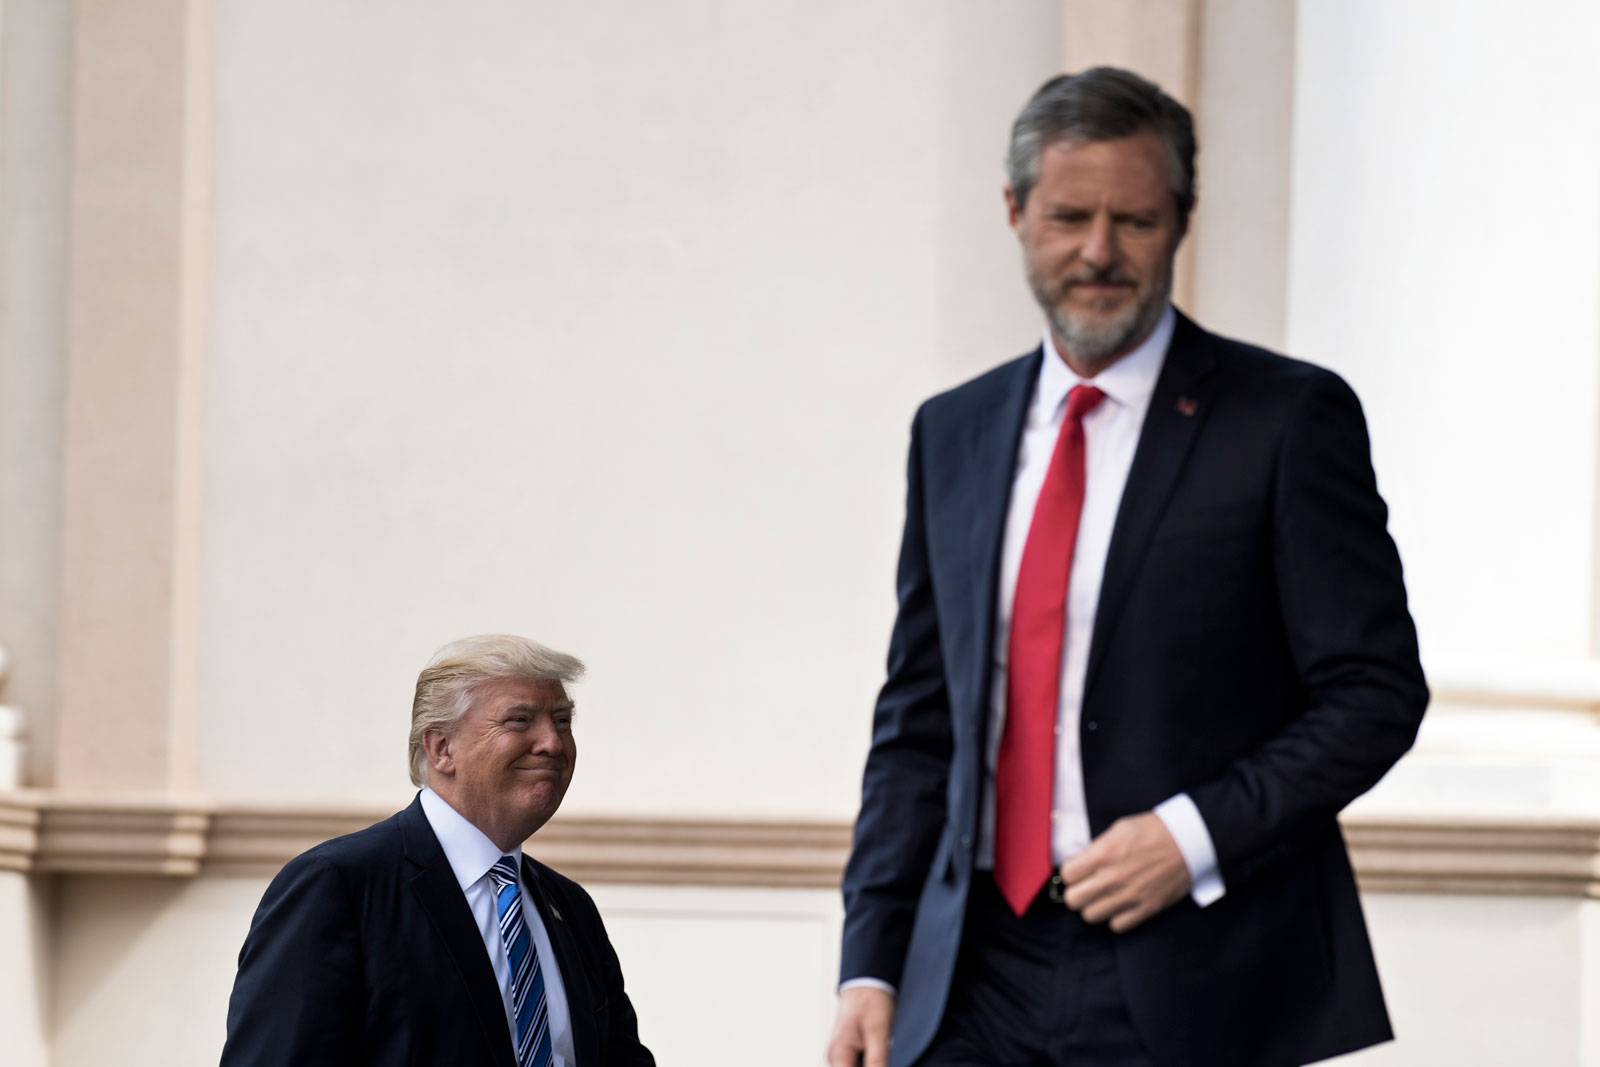 The Fall of Jerry Falwell Jr.